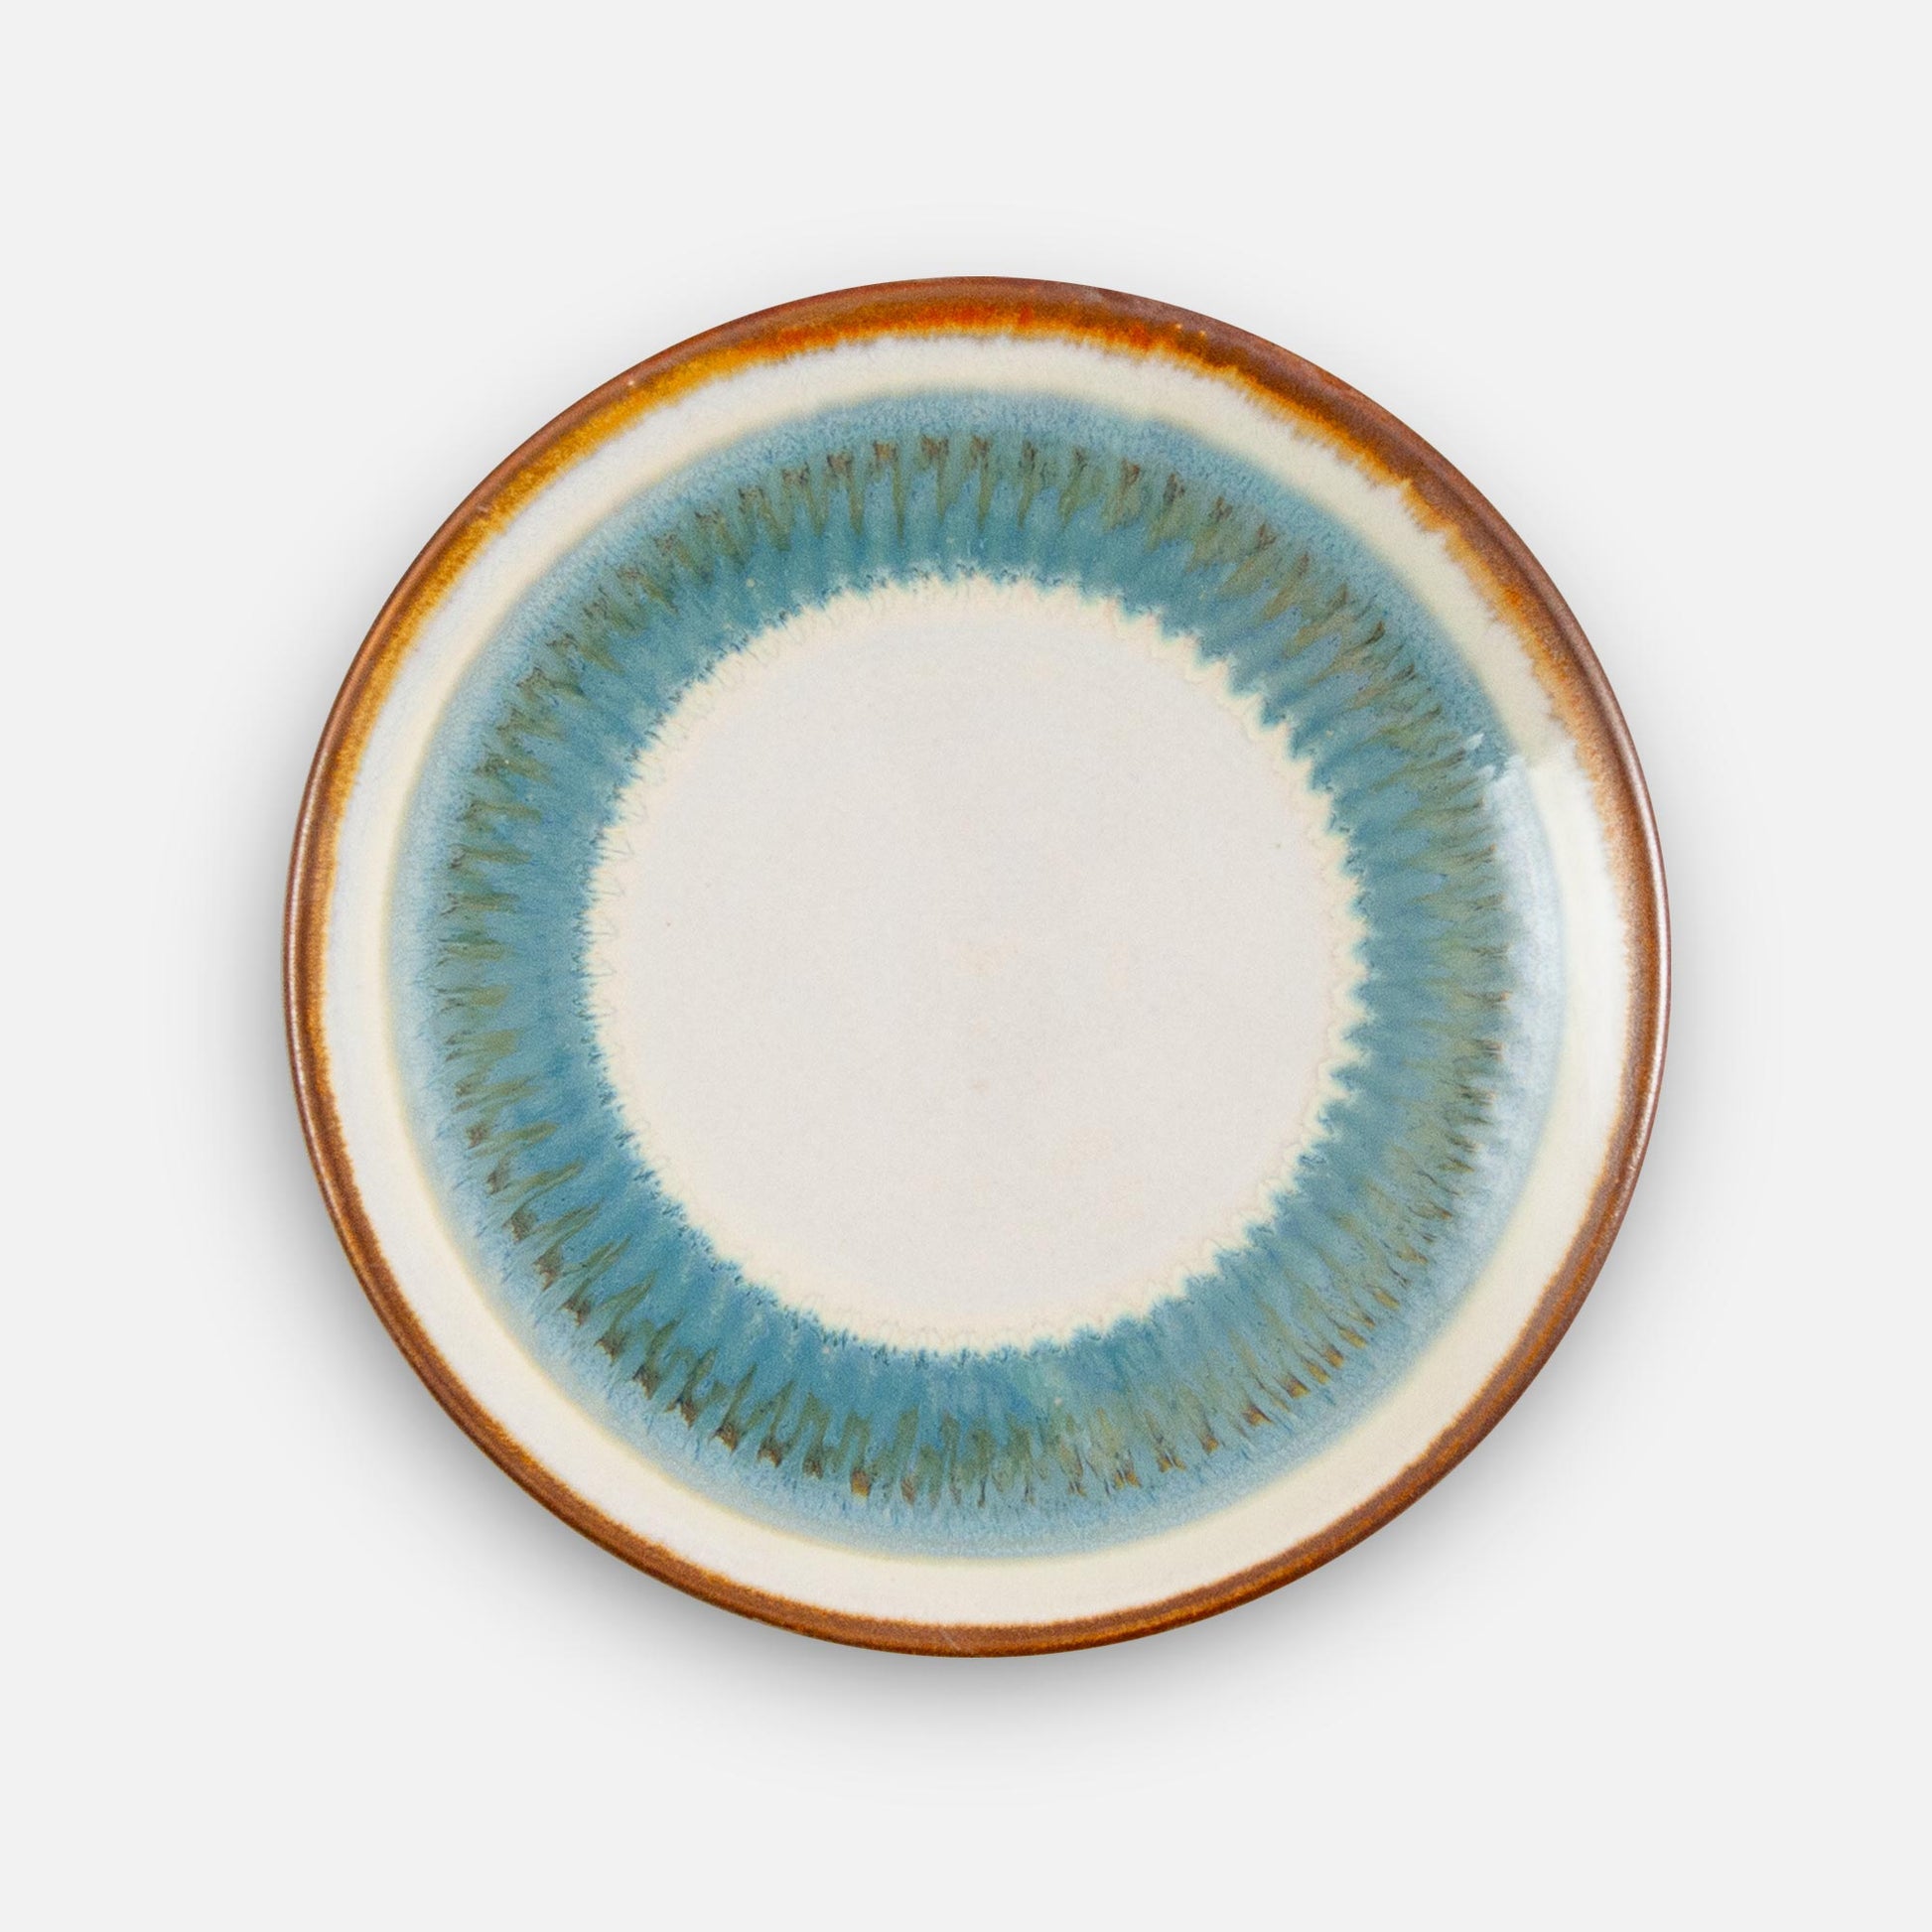 Handmade Pottery Rimless Dinner Plate made by Georgetown Pottery in Maine in Ivory Blue Oribe pattern